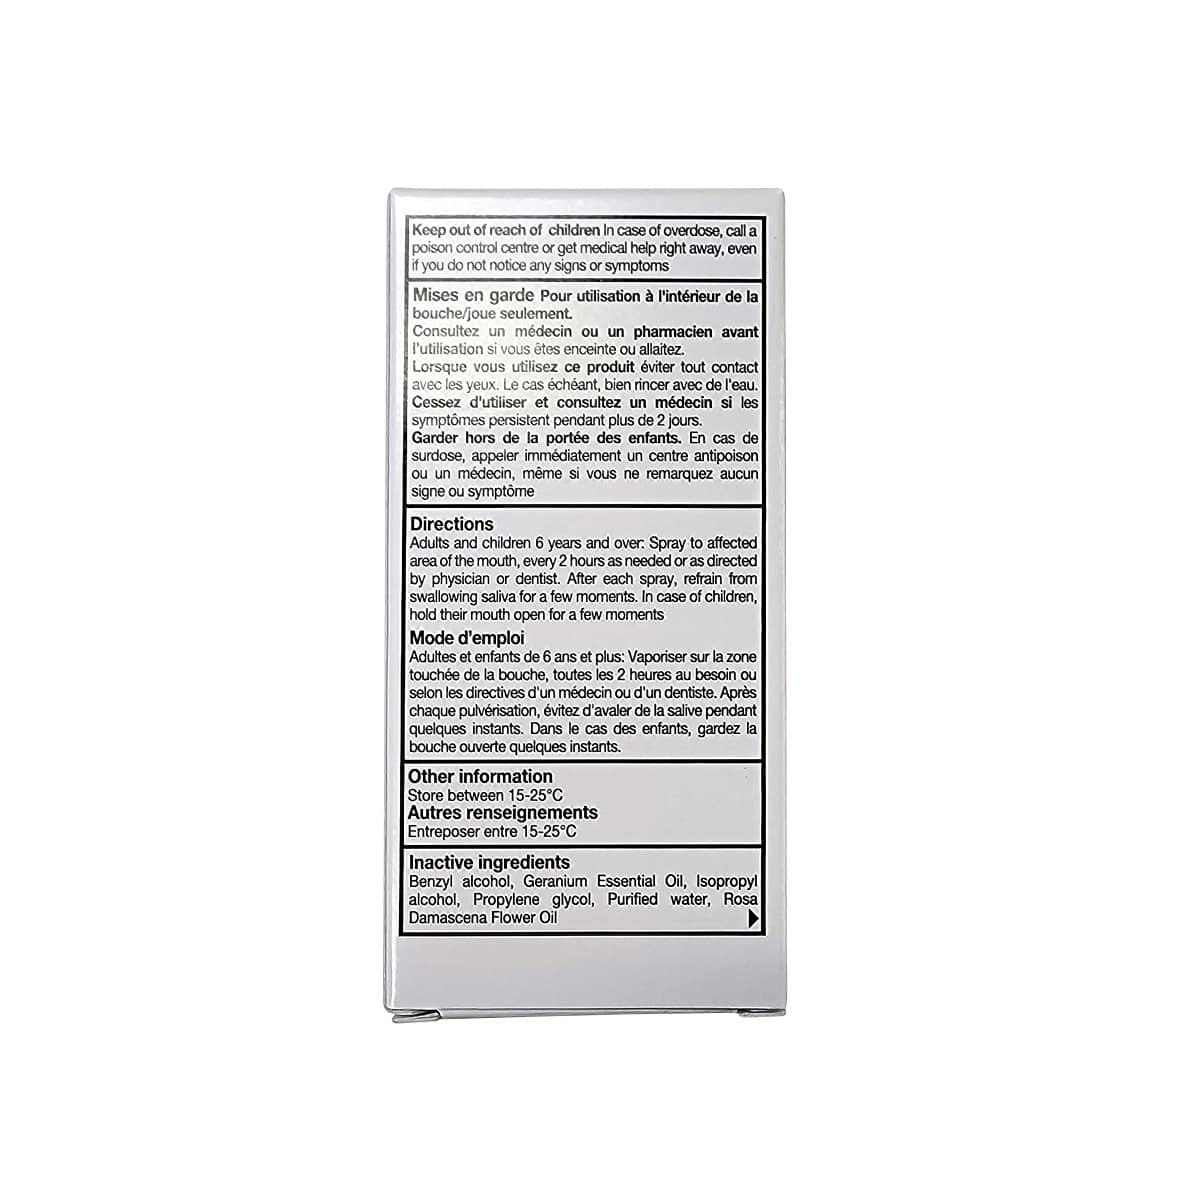 Cautions, directions for Dequadin Oral Spray (25 mL)